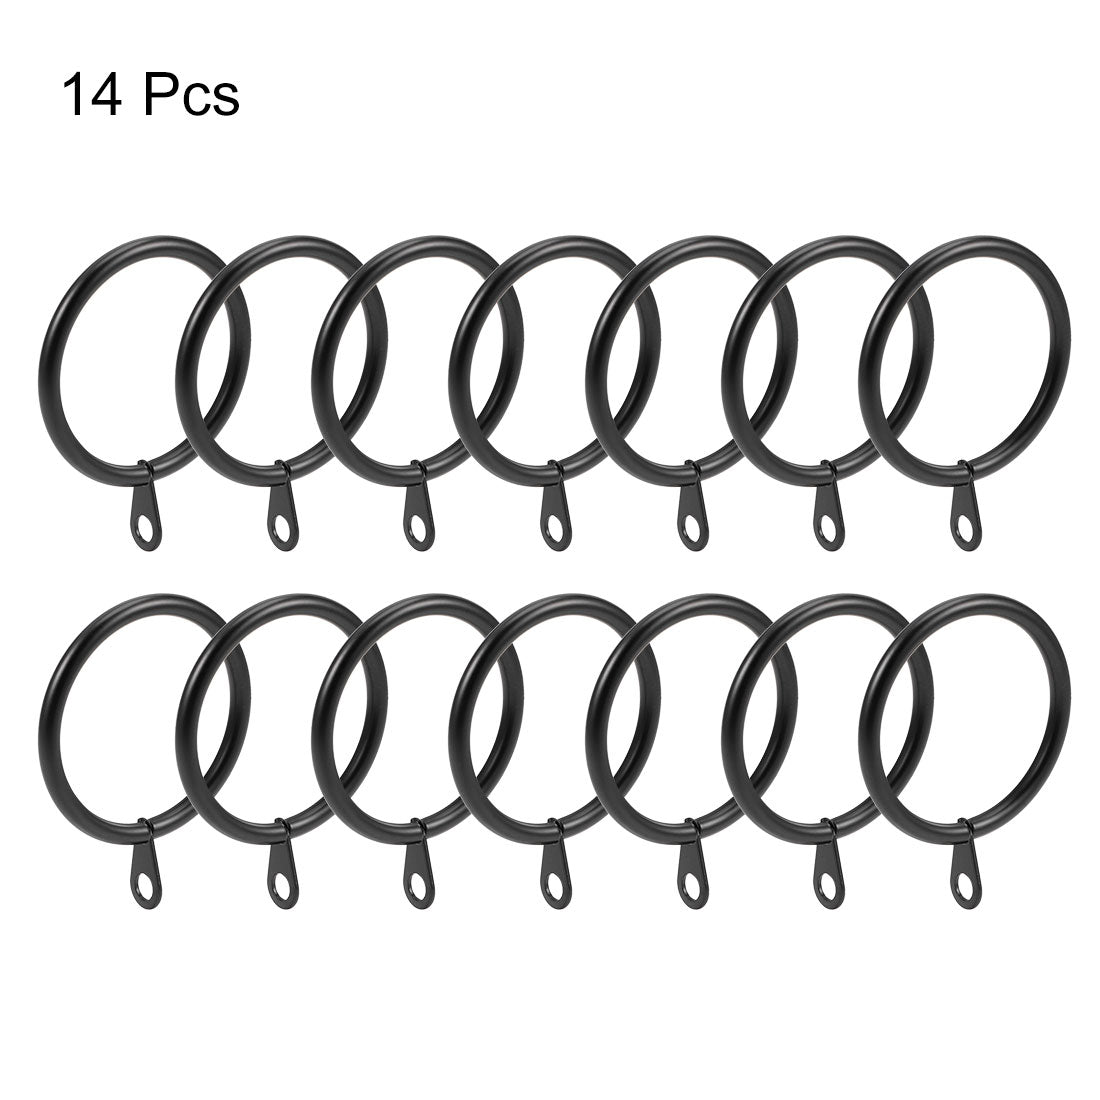 uxcell Uxcell Curtain Rings Metal 38mm Inner Dia Drapery Ring for Curtain Rods Black 14 Pcs